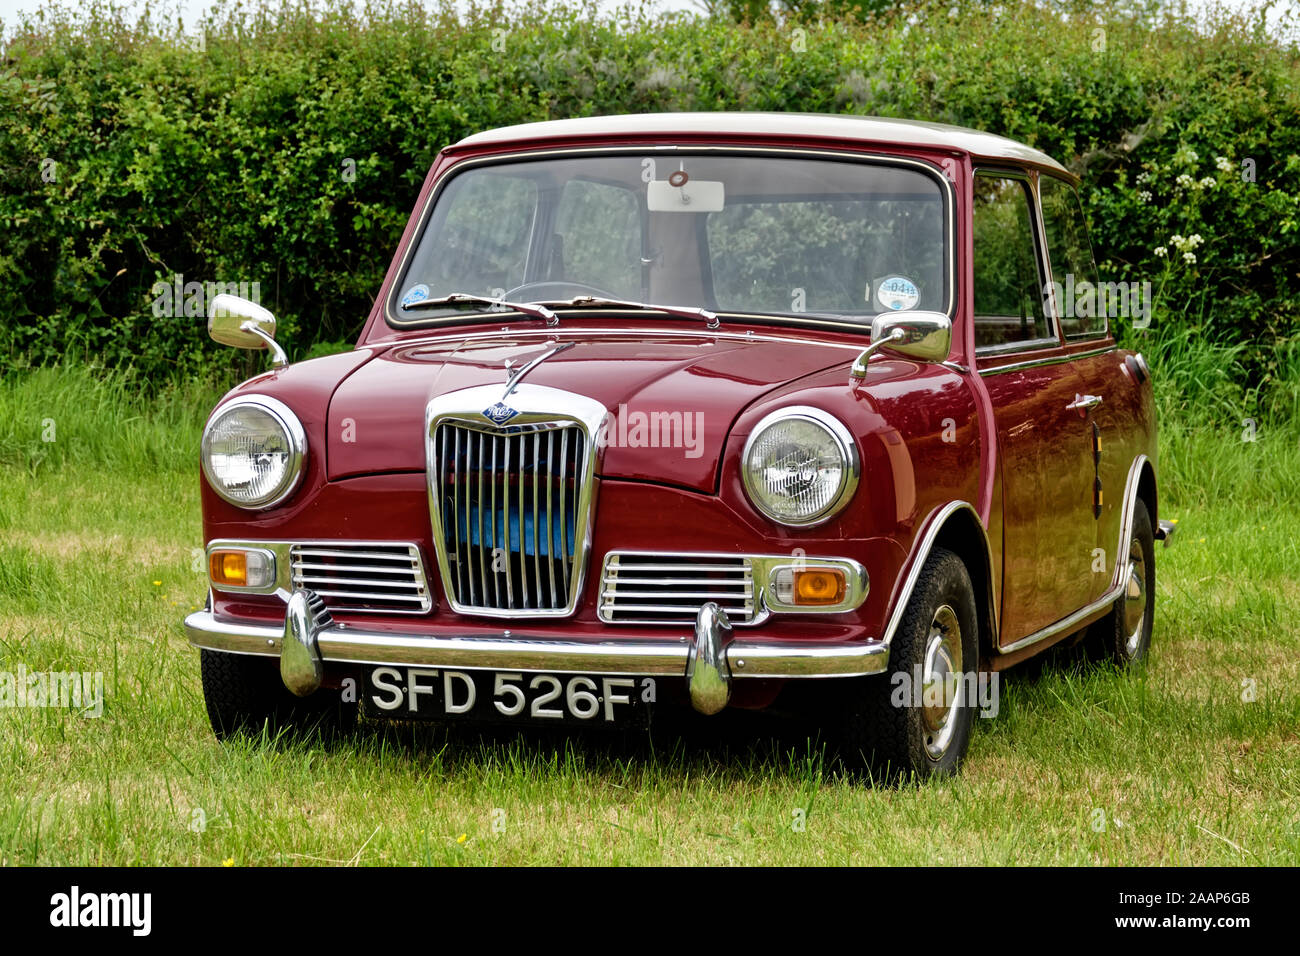 Selwood,Wiltshire / UK - May 26 2019:A Riley Elf Mk III, SFD 526F, first registered in 1968, pictured at the Selwood Vintage Vehicle & Steam Fair 2019 Stock Photo